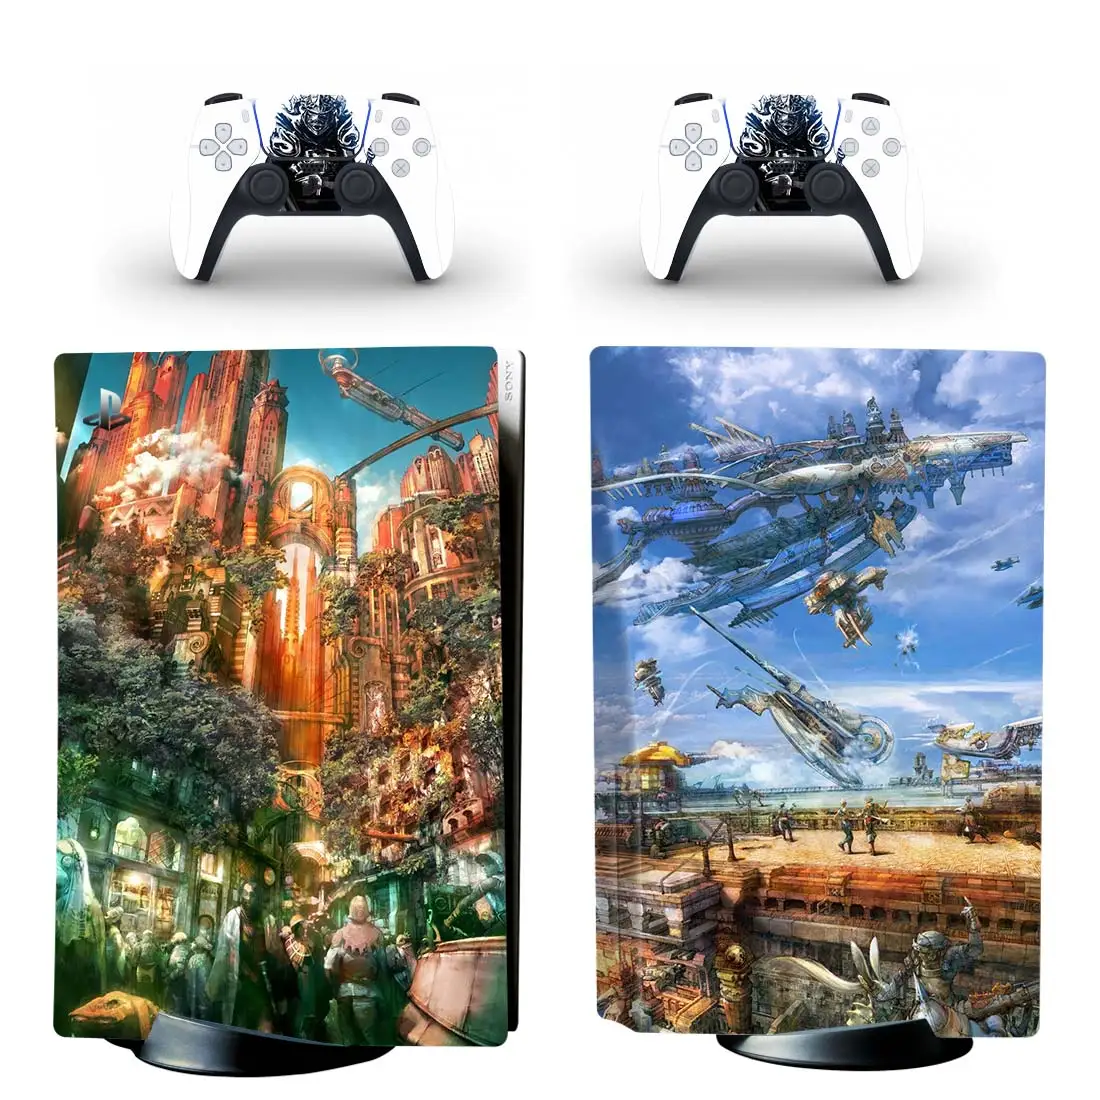 Custom Design PS5 Standard Disc Edition Skin Sticker Decal Cover for PlayStation 5 Console & Controllers PS5 Skin Sticker Vinyl